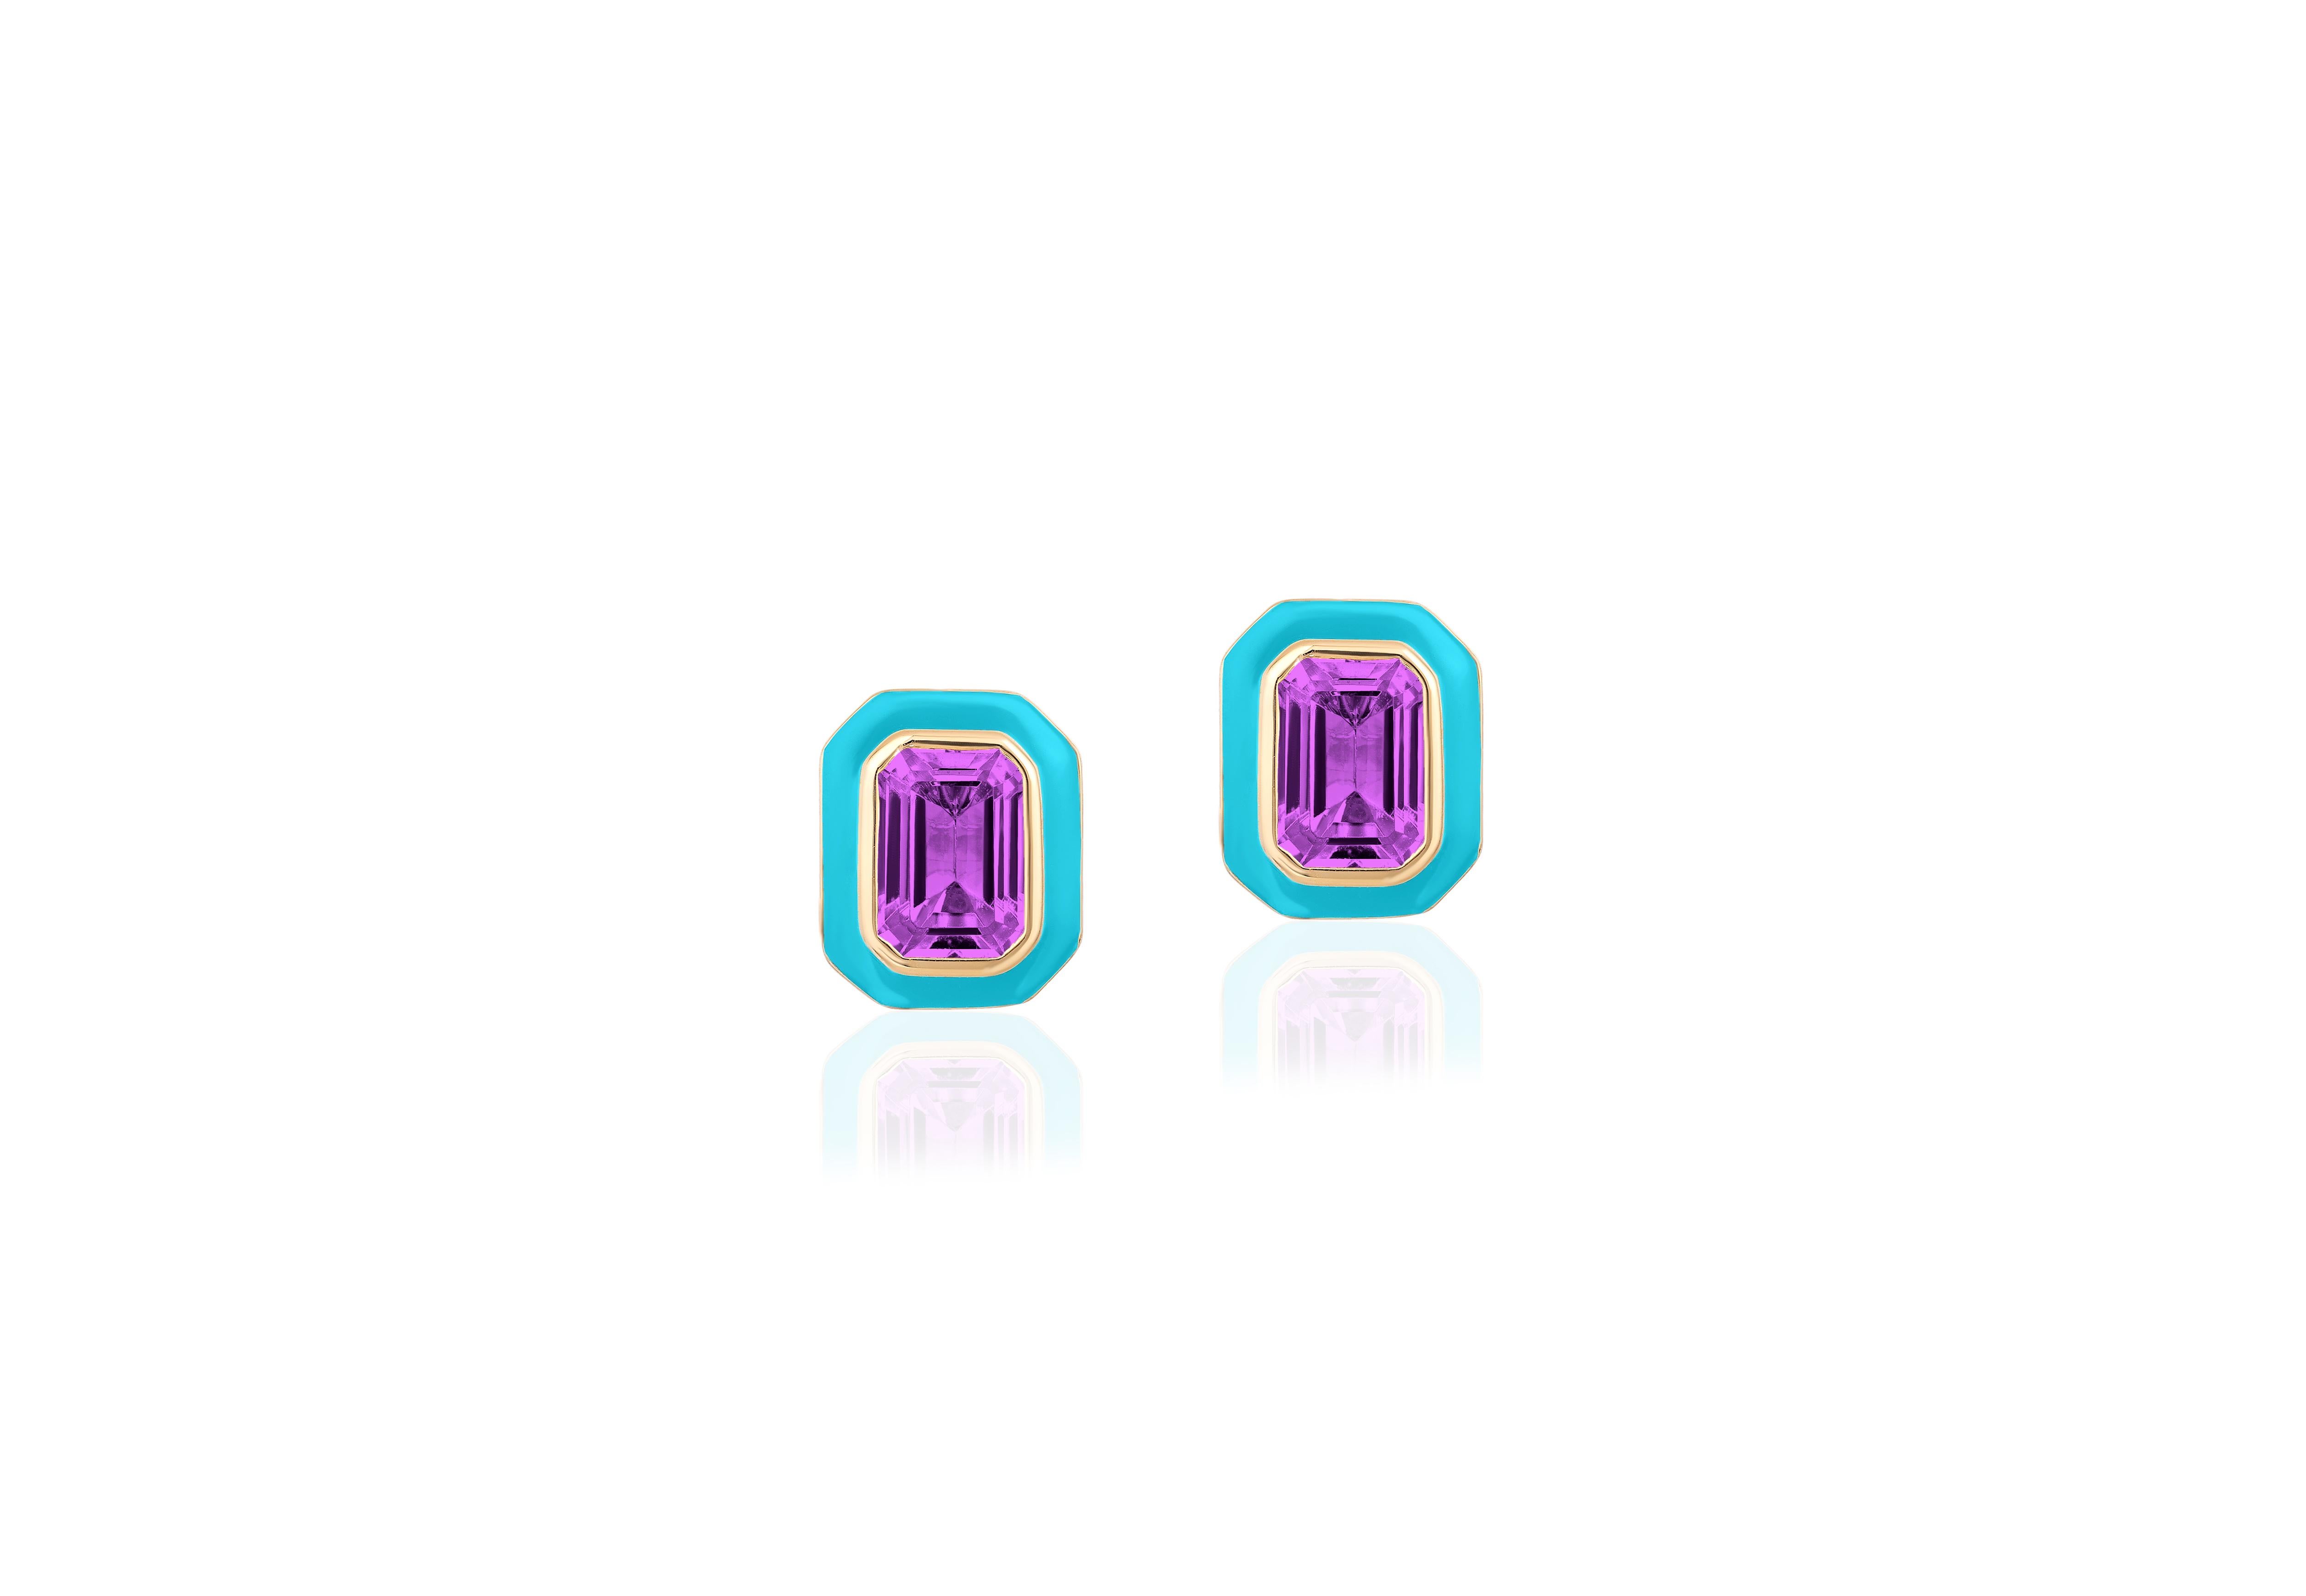 These earrings are a unique combination of Amethyst and Turquoise enamel. If you want to make a statement these are the perfect earrings to do it!

A pair of 7 x 5 mm Amethyst Emerald Cut studs earrings with Turquoise enamel. The studs have posts